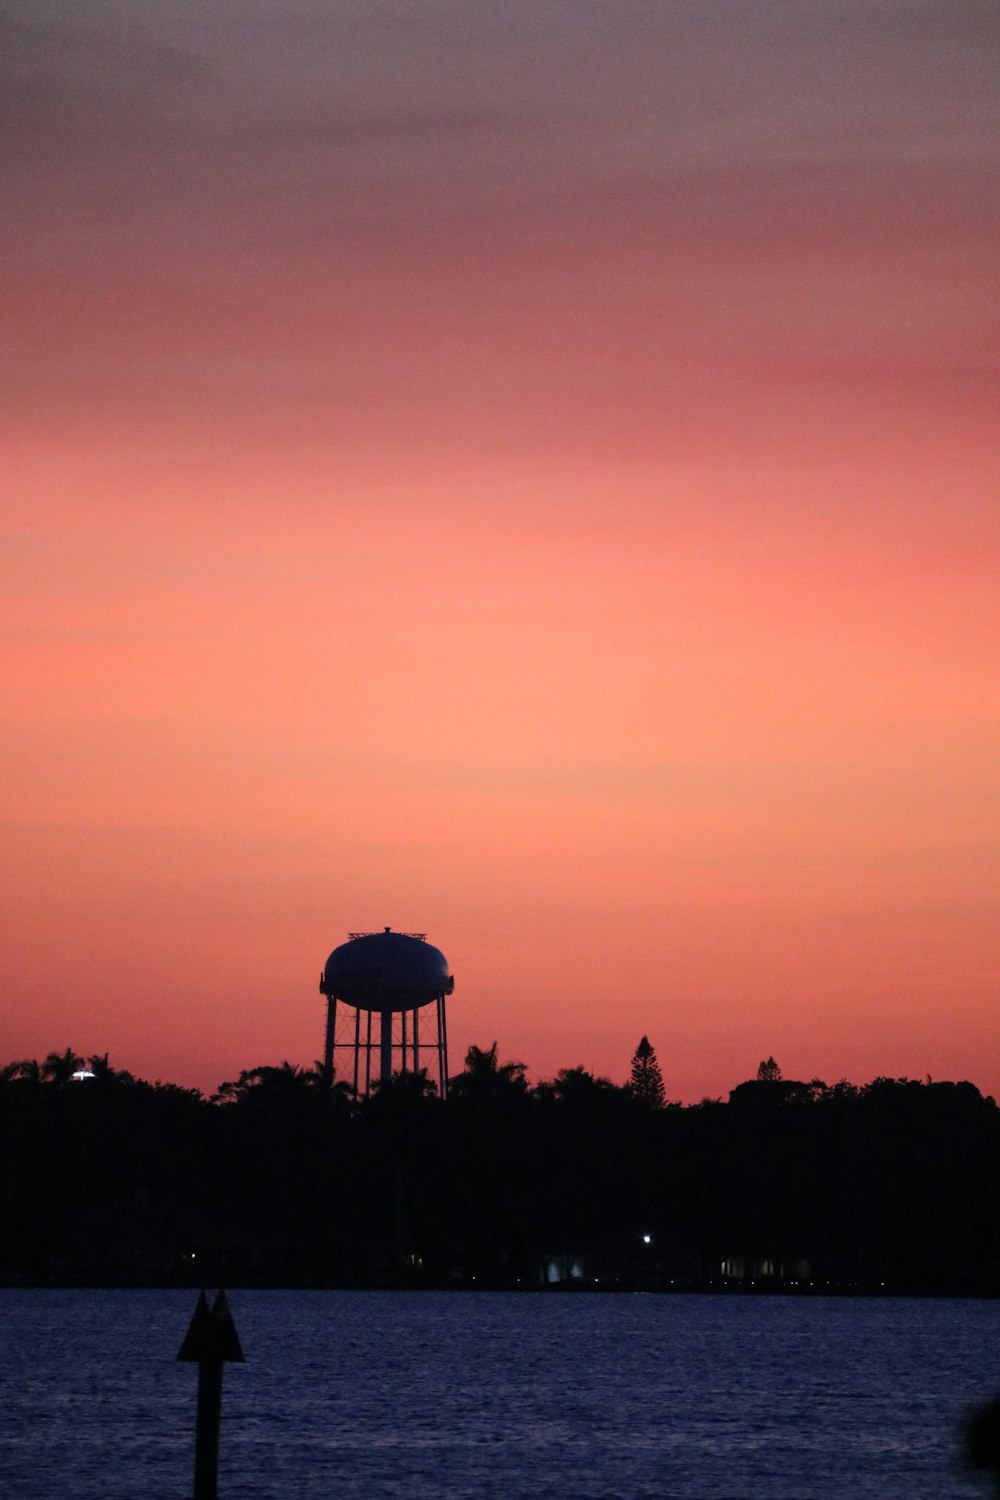 a large body of water with a water tower in the background